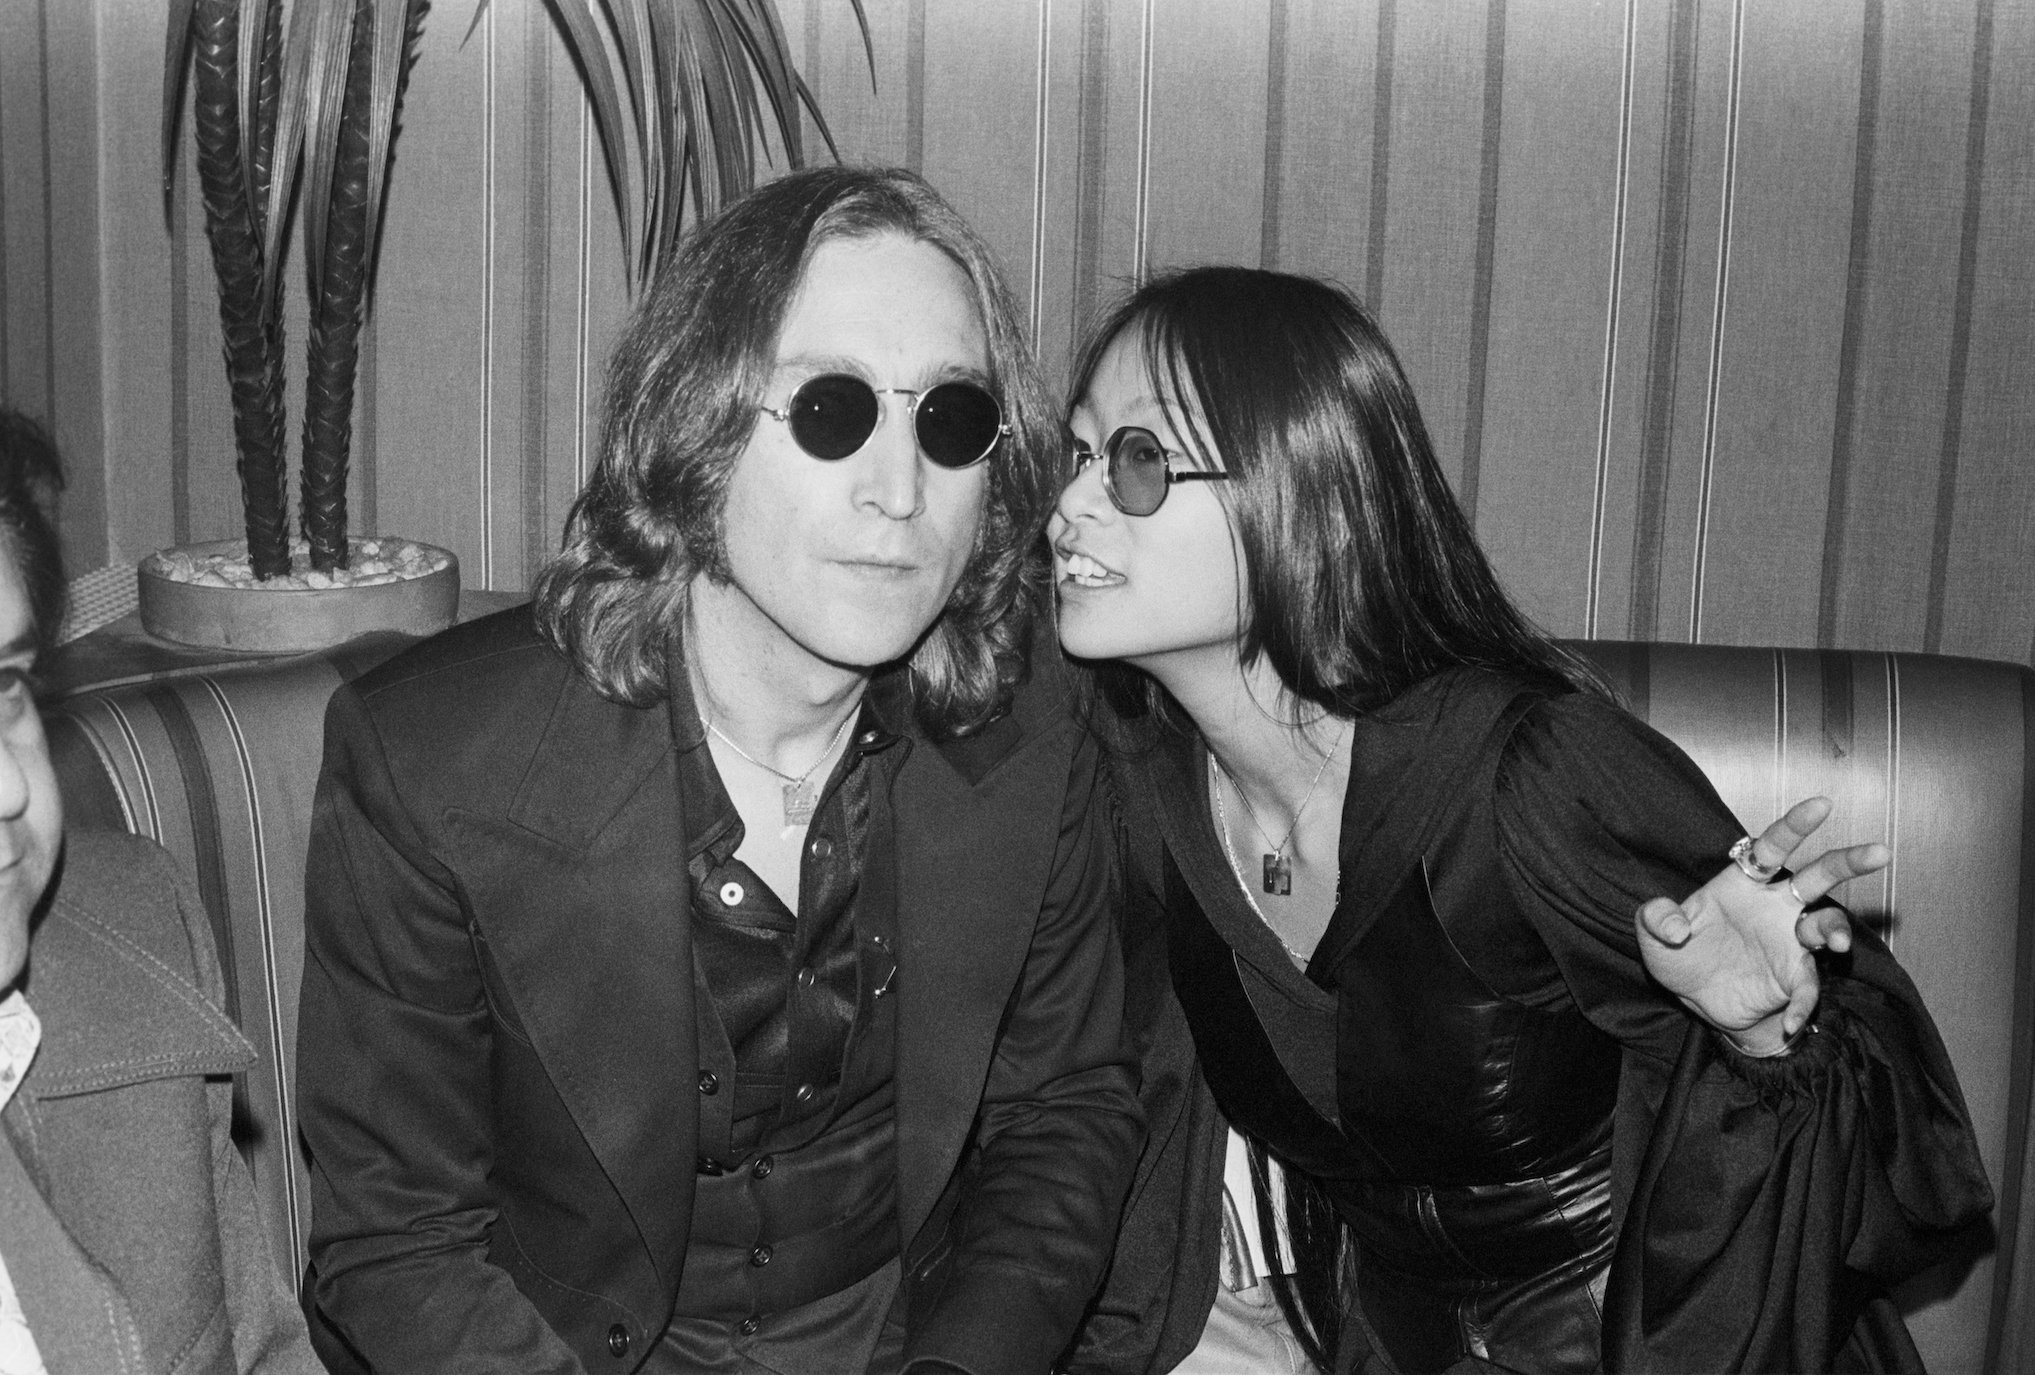 John Lennon and May Pang in New York during his Lost Weekend